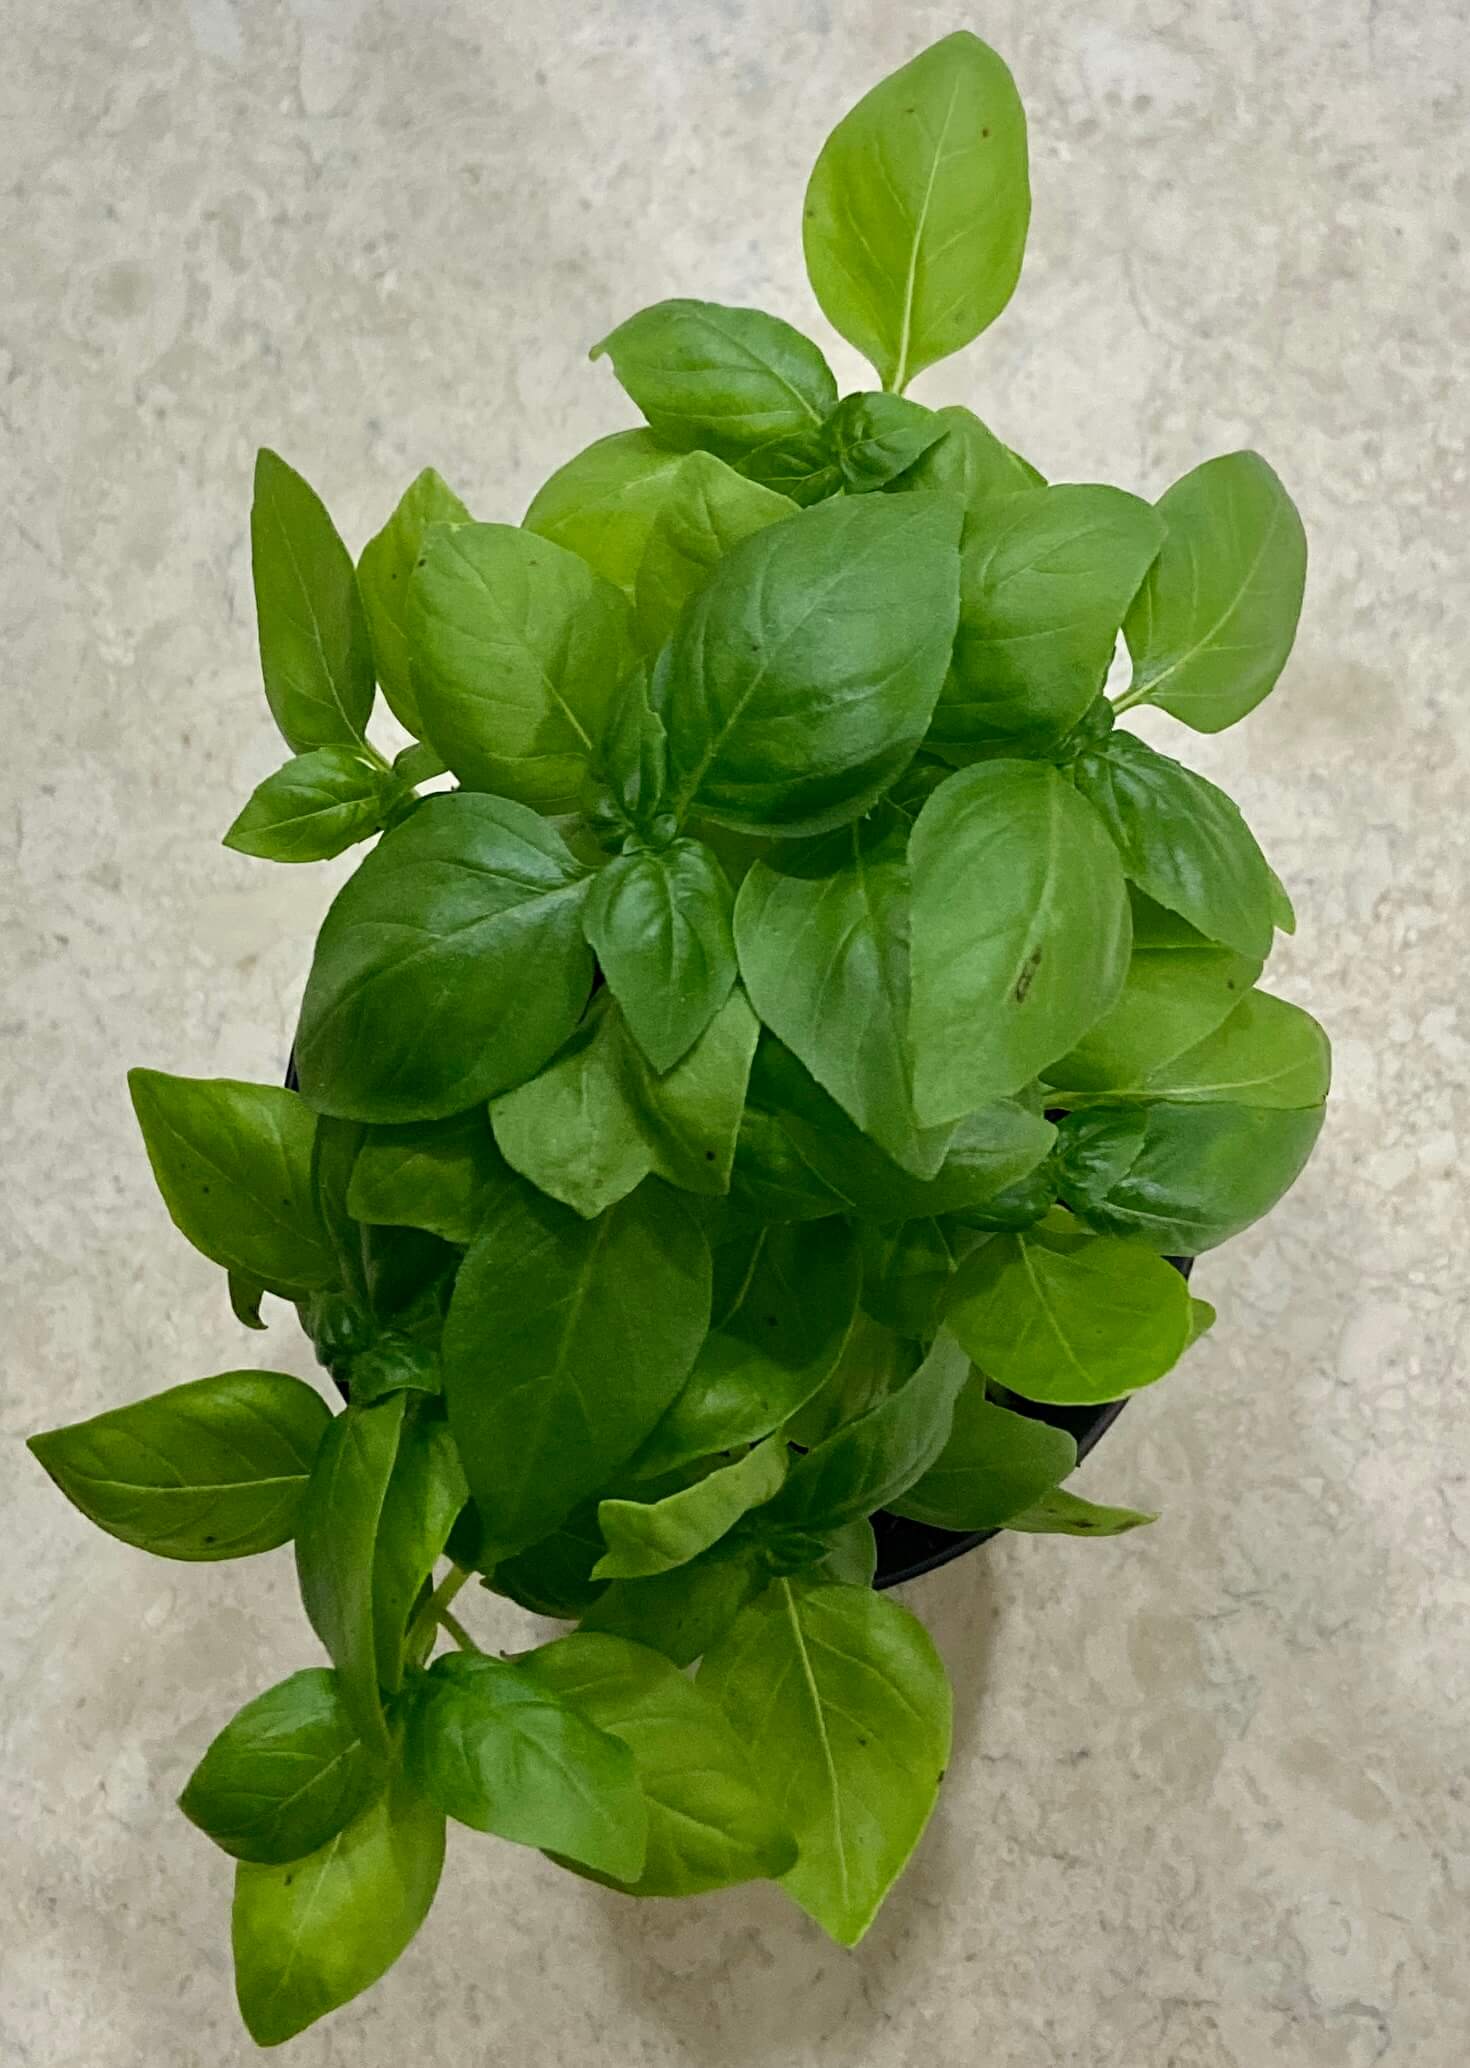 Basil plant in a pot